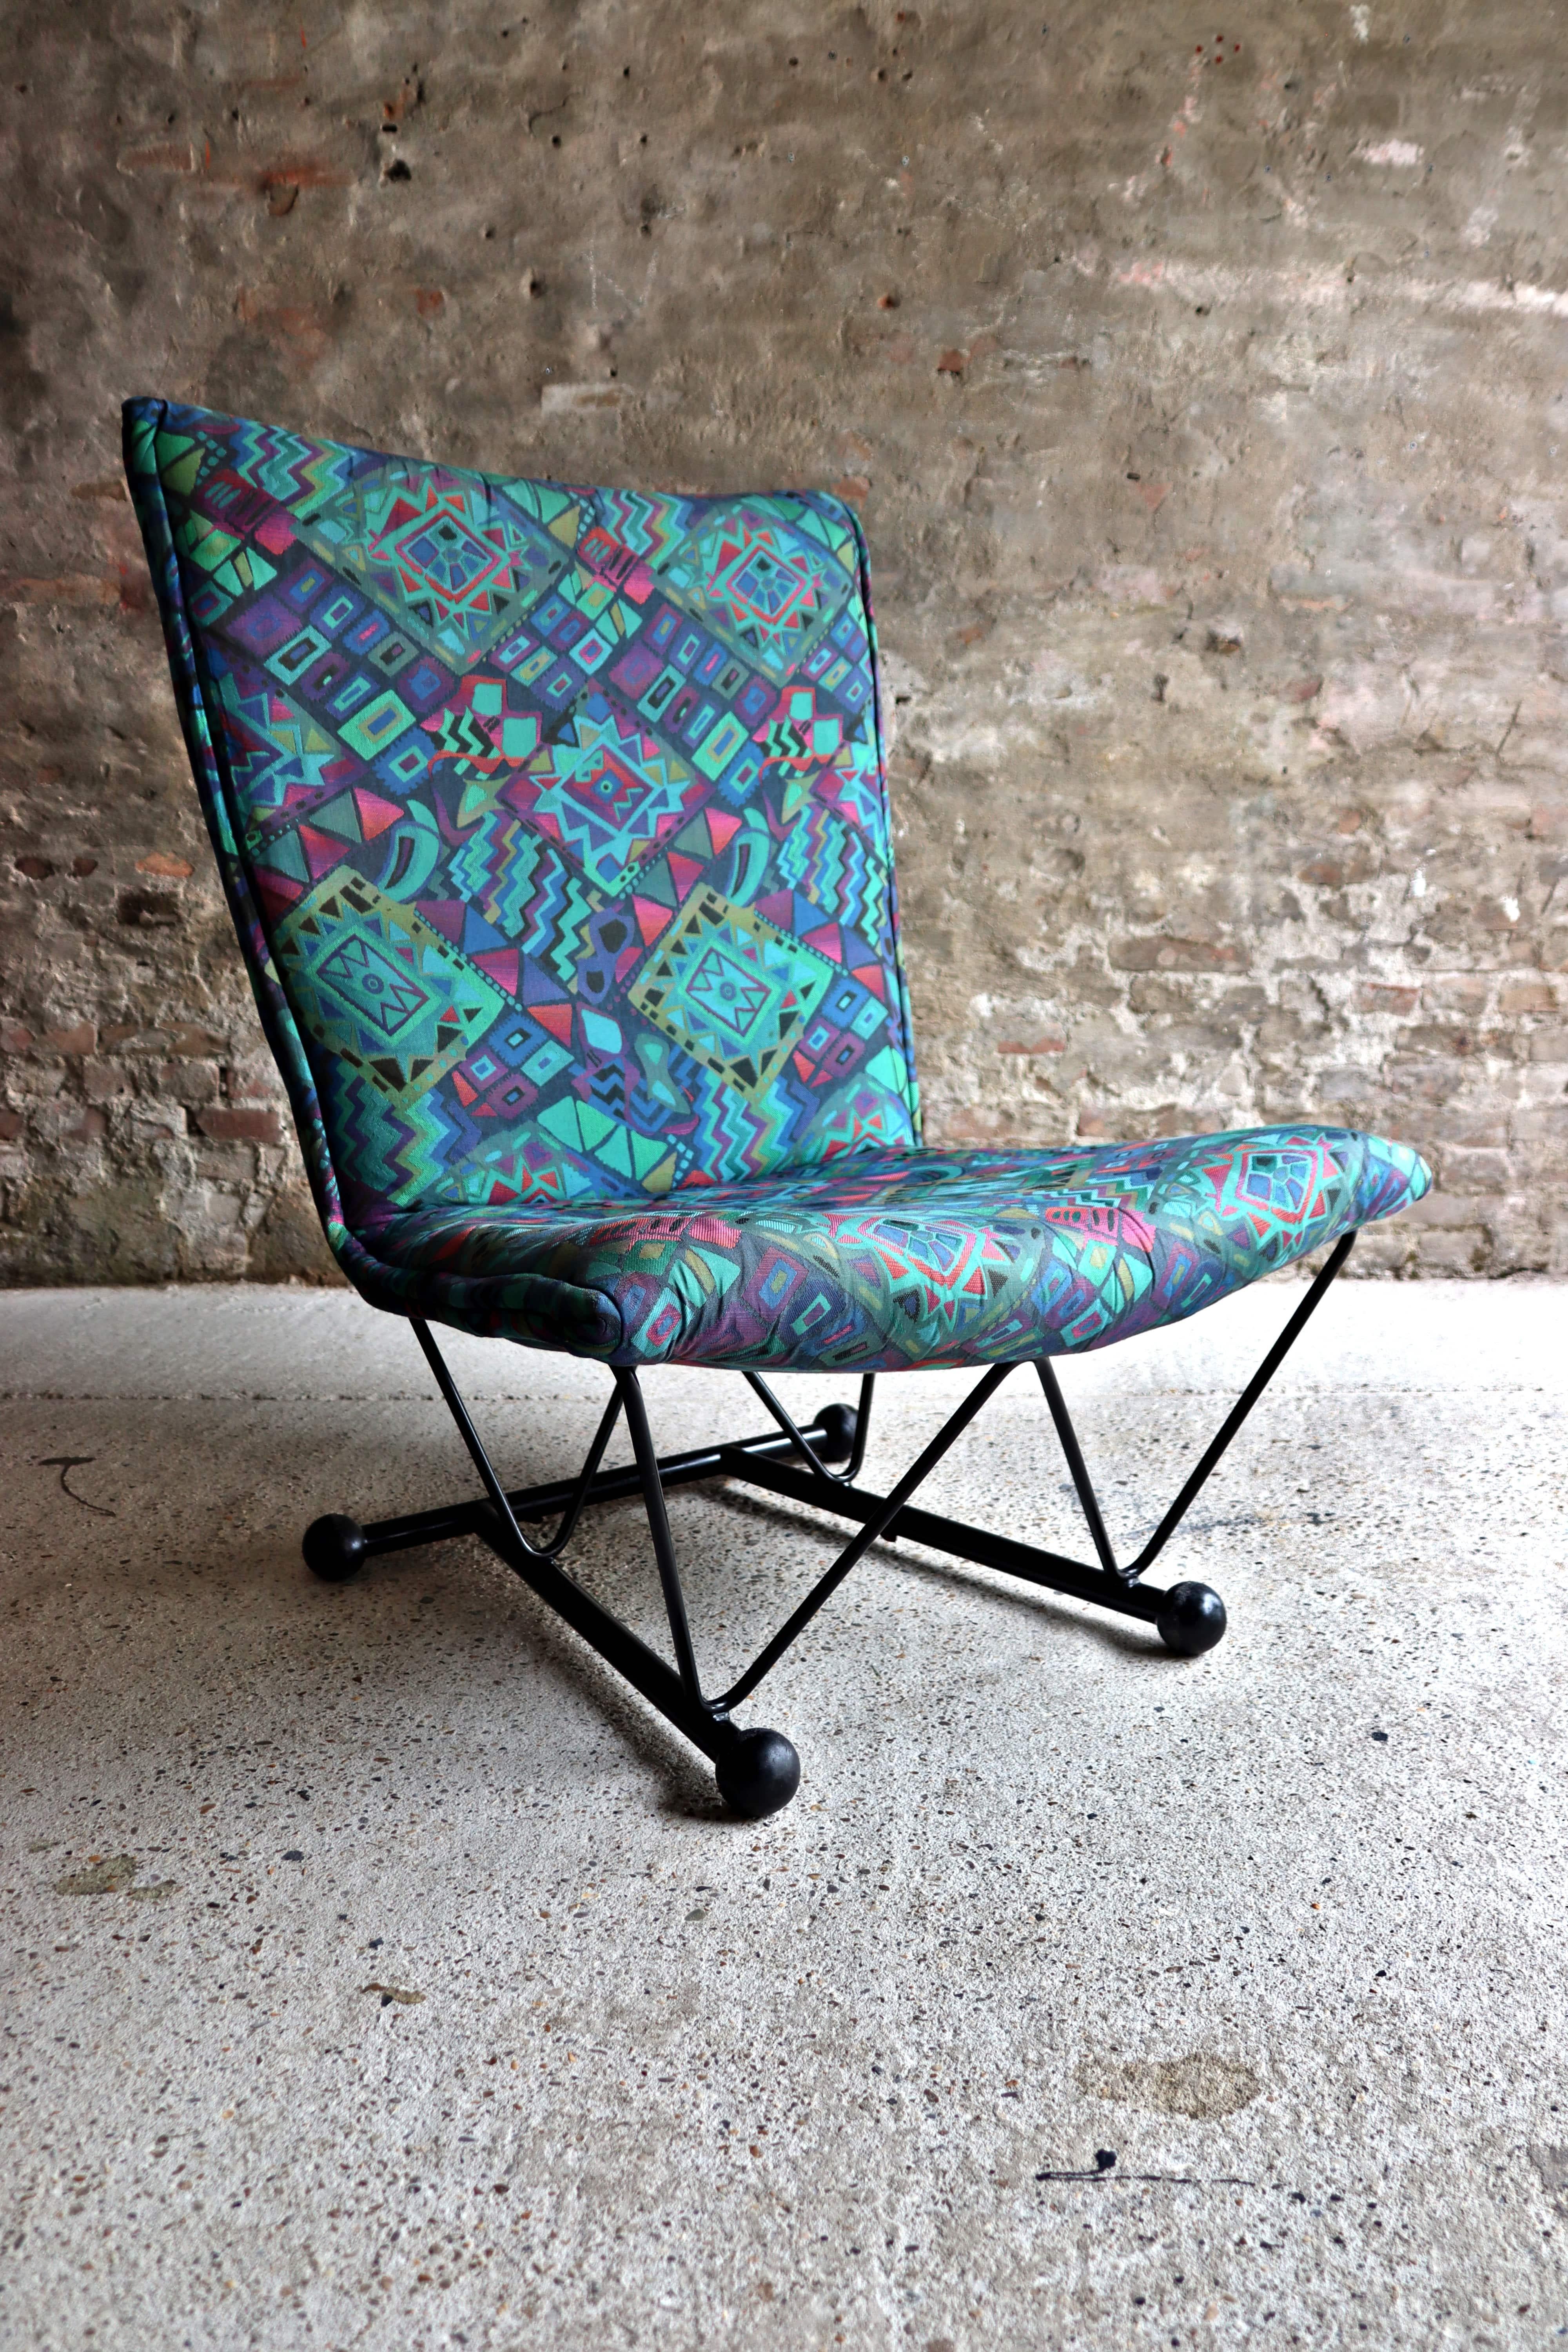 This cool vintage 1980s armchair is called Flyer chair and is designed by Pierre Maizarac and Karel Boonzaadjer for Young International (a label or brand of Gelderland). Beautiful fabric in good condition. It has minor signs of age and